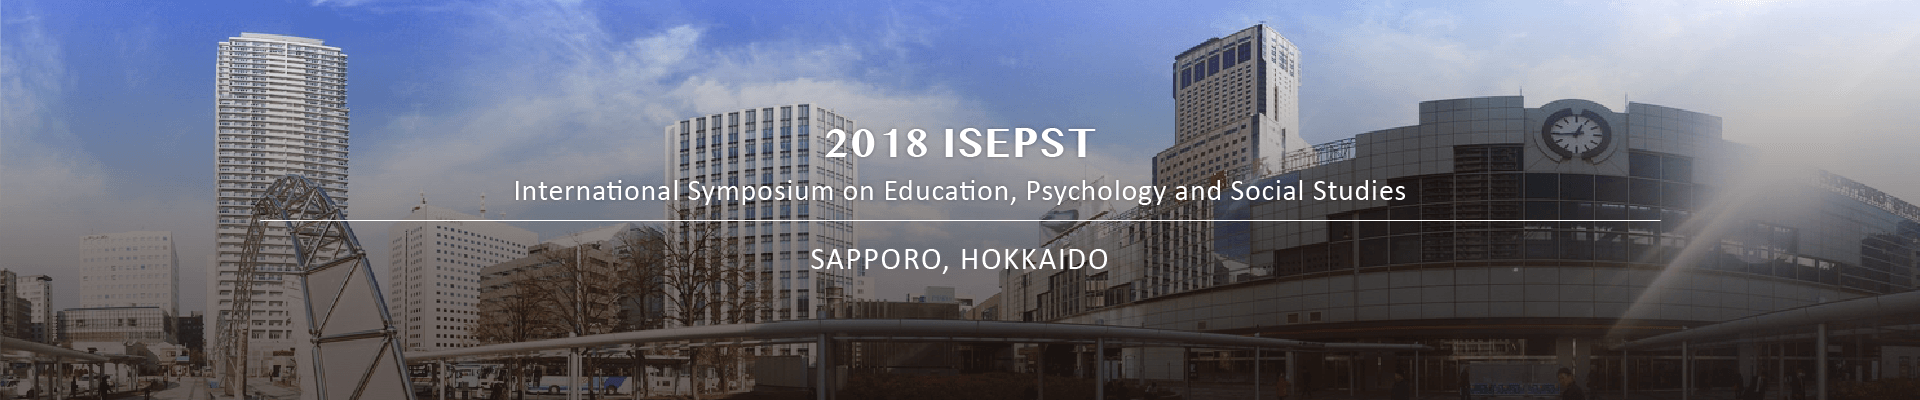 
For more information, please visit: http://isepst.org
or contact: ISEPST@ISEPST.org